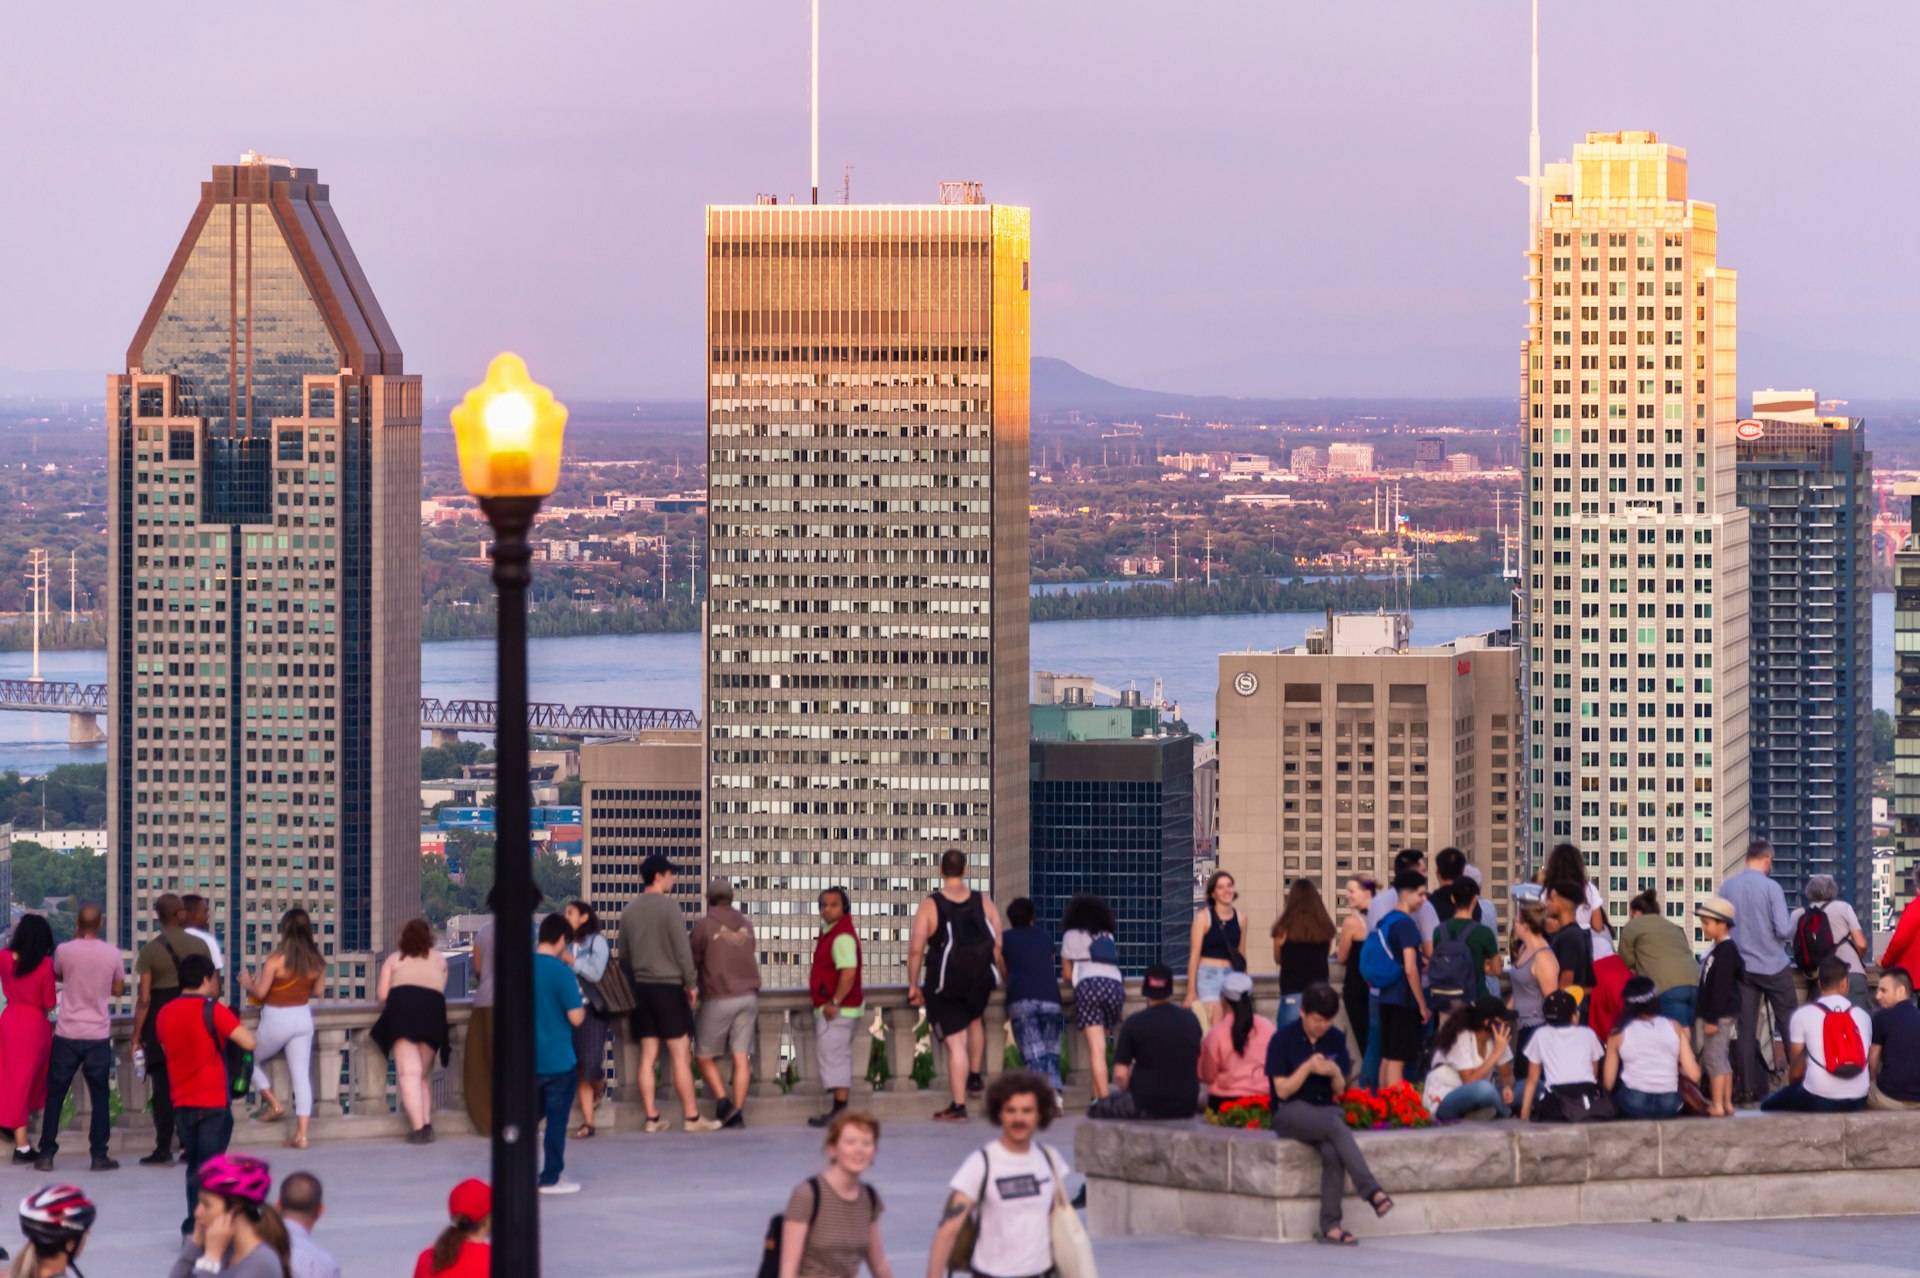 Visitors taking in the view of Montreal skyline from Kondiaronk Belvedere during sunset